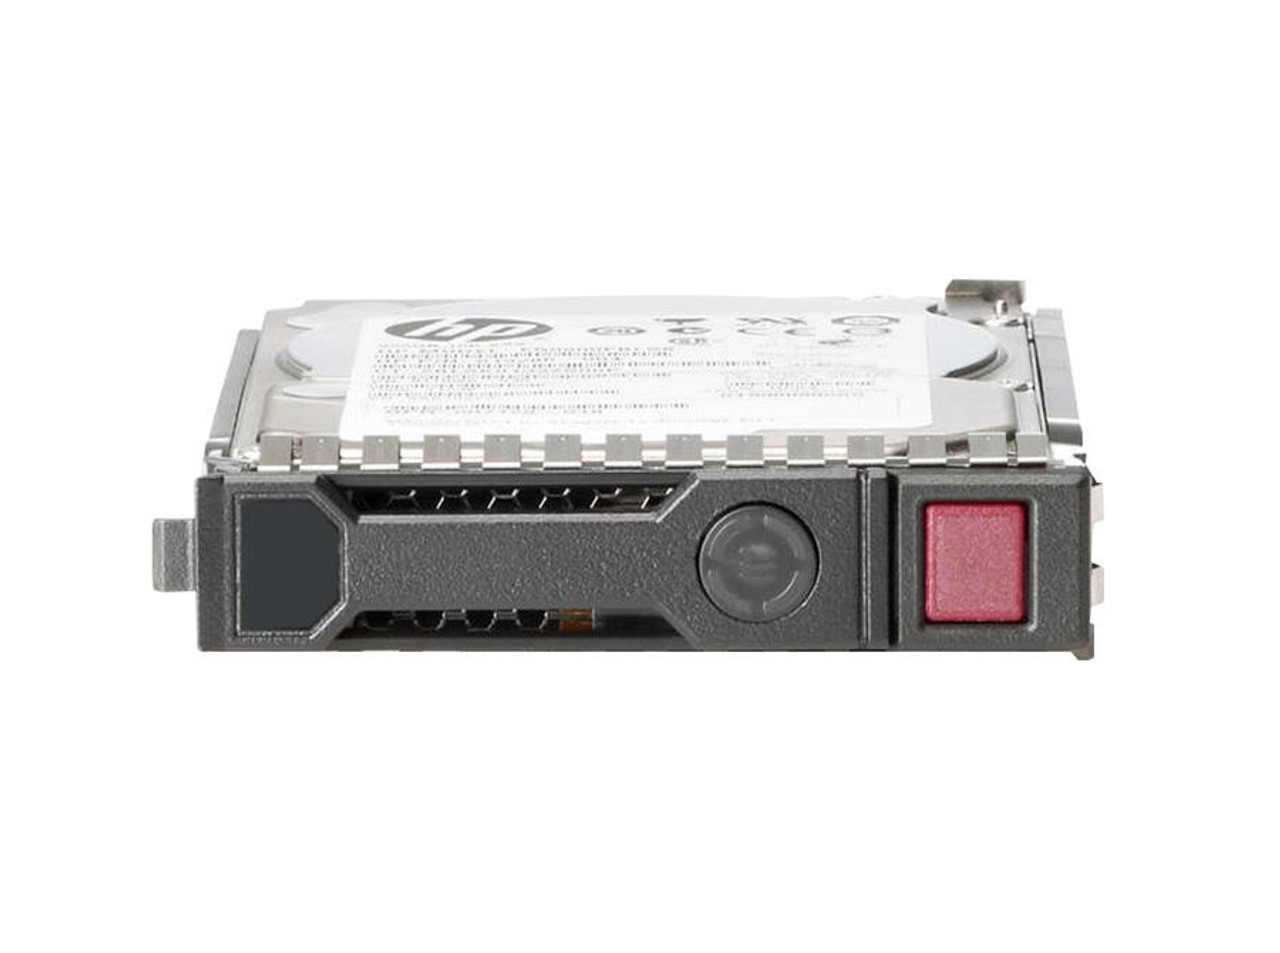 872285-002 HPE 1.2TB 10000RPM SAS 12Gbps Dual Port Hot Swap (512e) 2.5-inch Internal Hard Drive with Smart Carrier